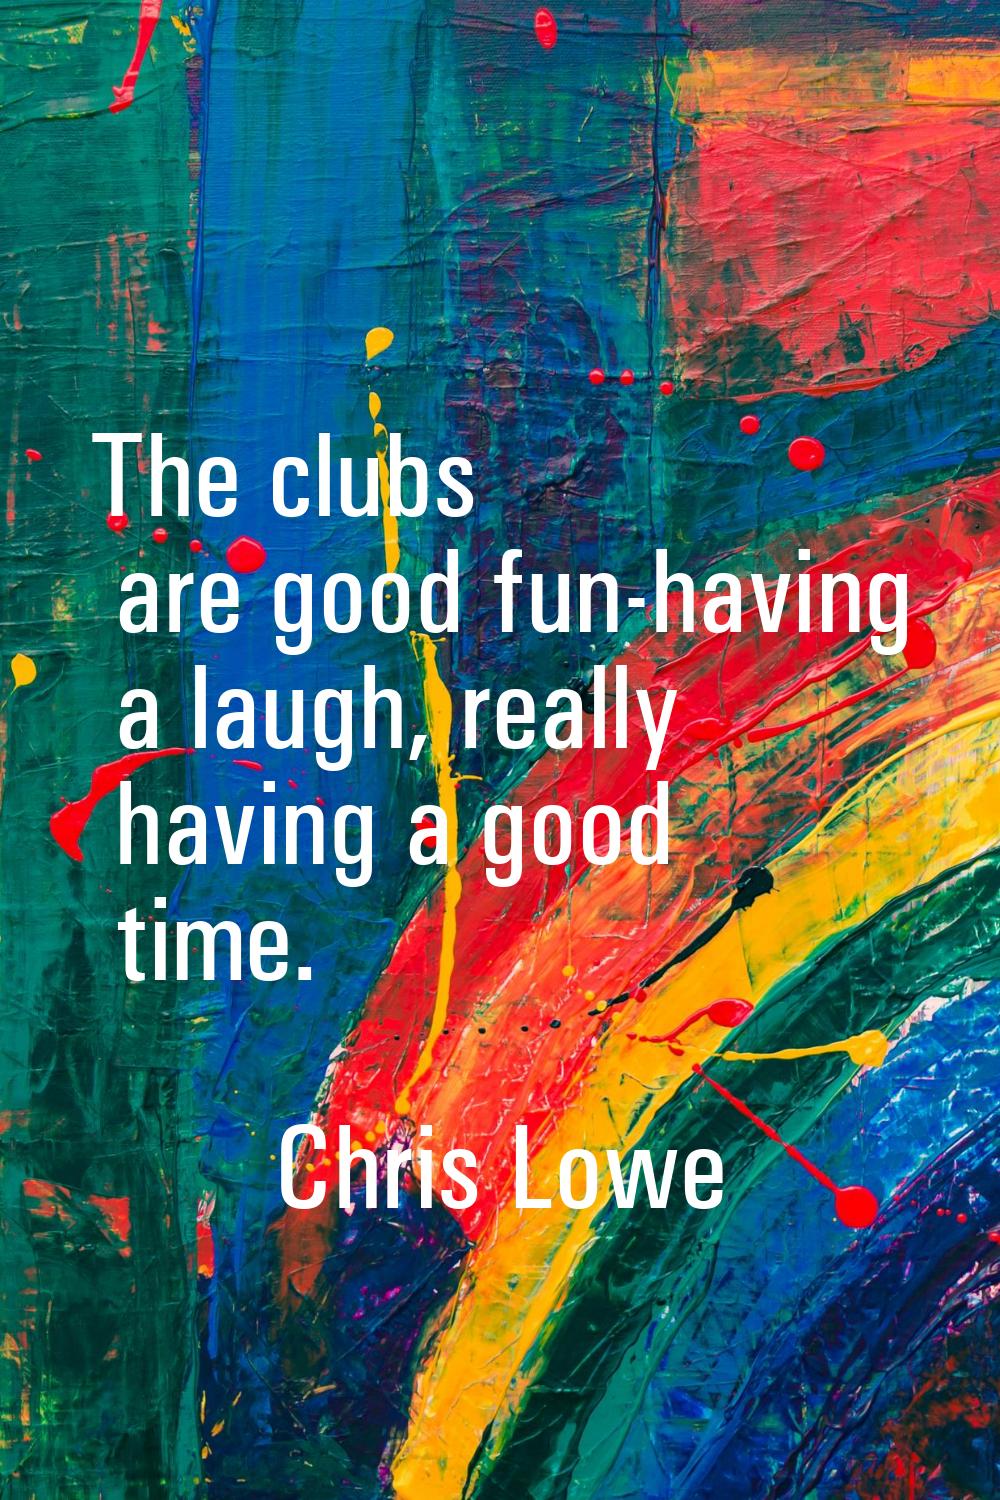 The clubs are good fun-having a laugh, really having a good time.